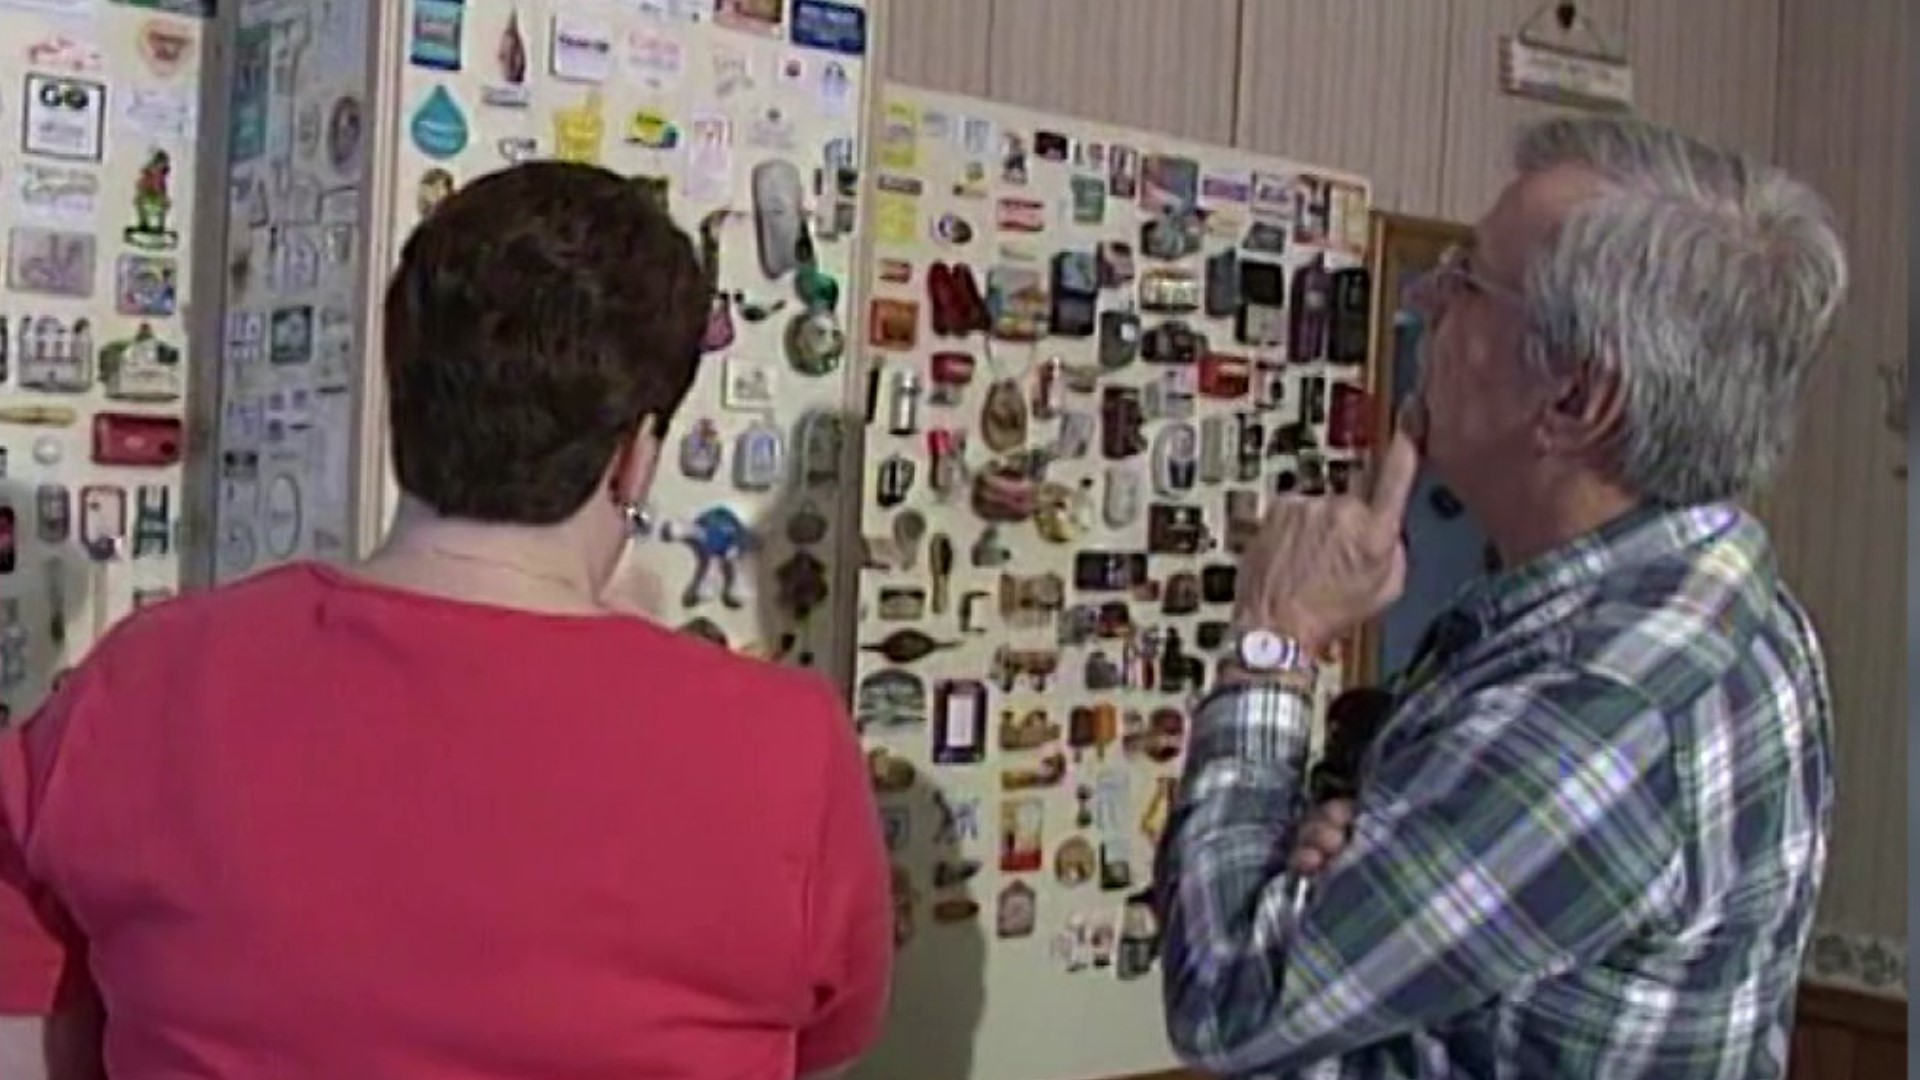 A collector in Montour County amassed more than 700 fridge magnets when Mike visited in 2001.